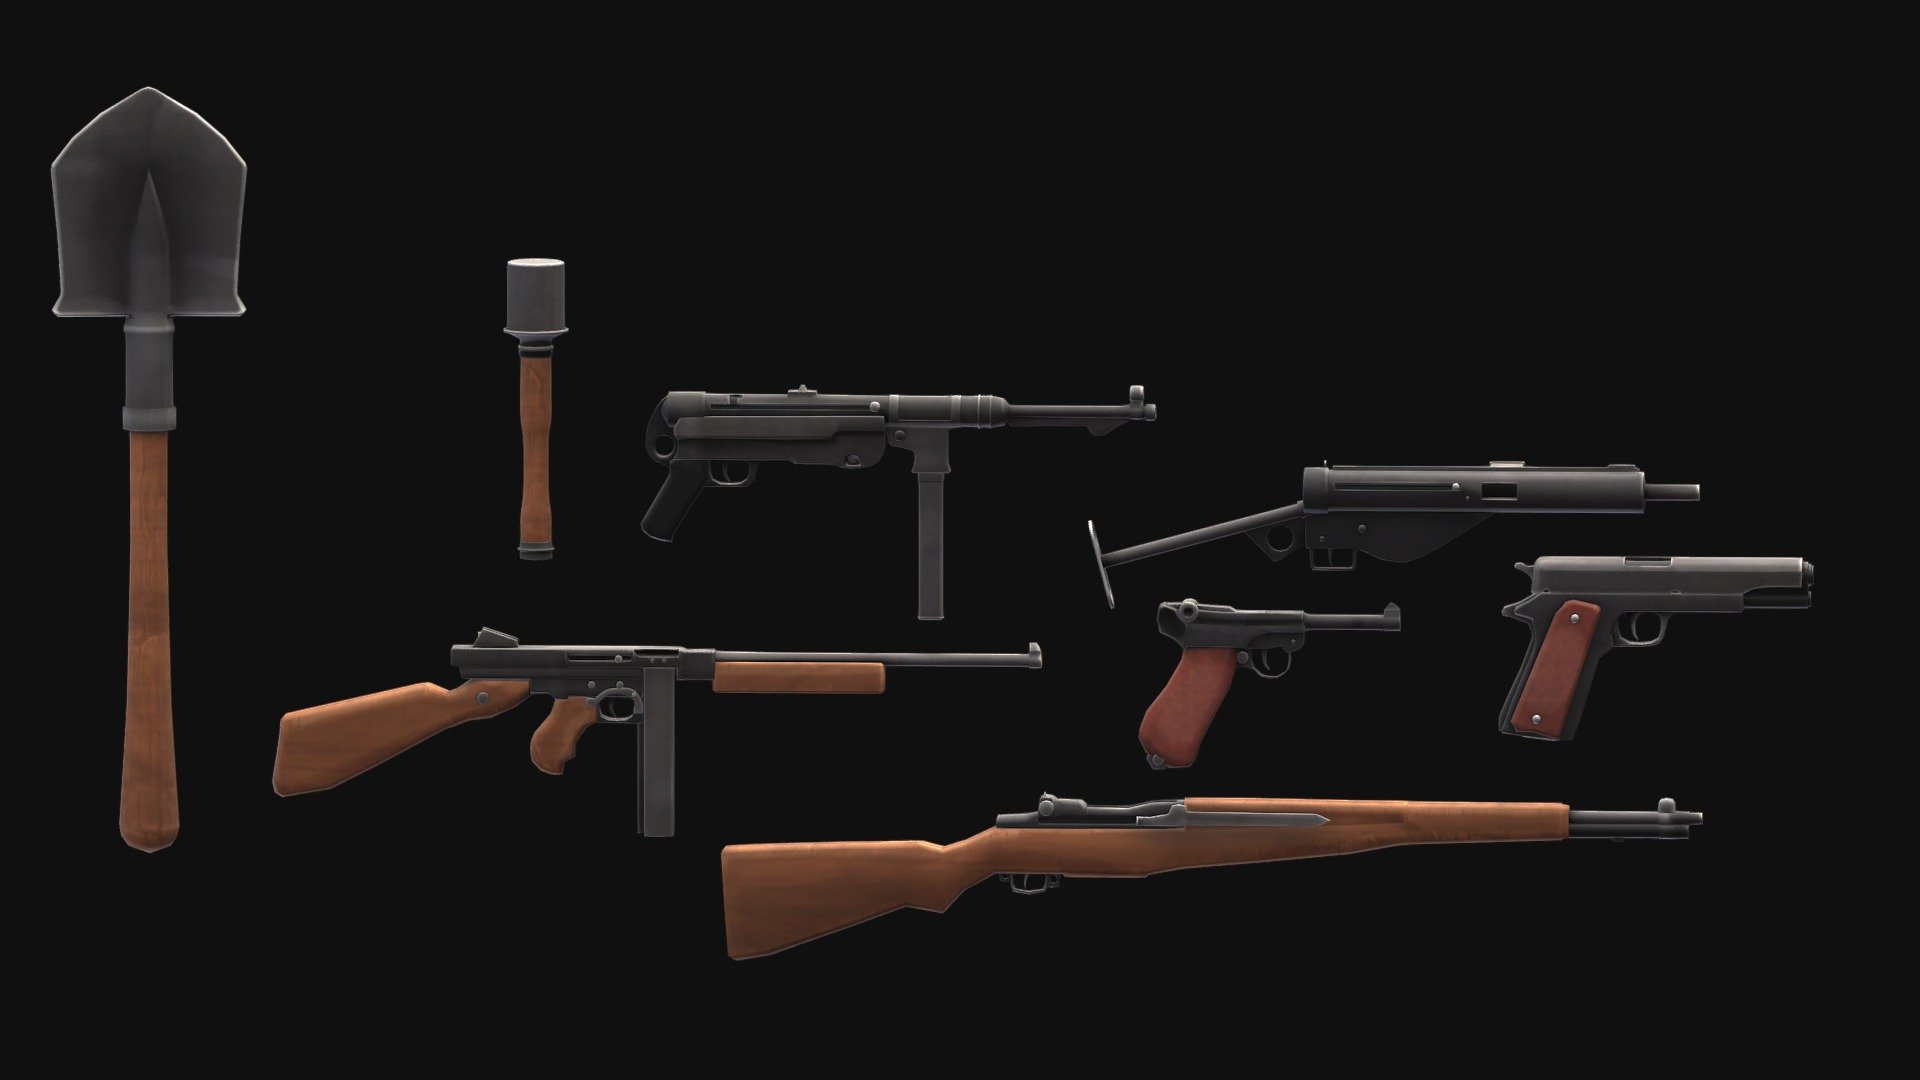 A fully textured stylized set of WW2 weapons.

including:
-M1 Garand
-MP 40
-Sten
-Thompson Machine Gun
-luger
-M1911 Pistol
-Stielhandgranate
-Shovel

Each weapon has its own textures and mag can be removed.
-included will be a zip folder with the individual weapons and texture sets 3d model